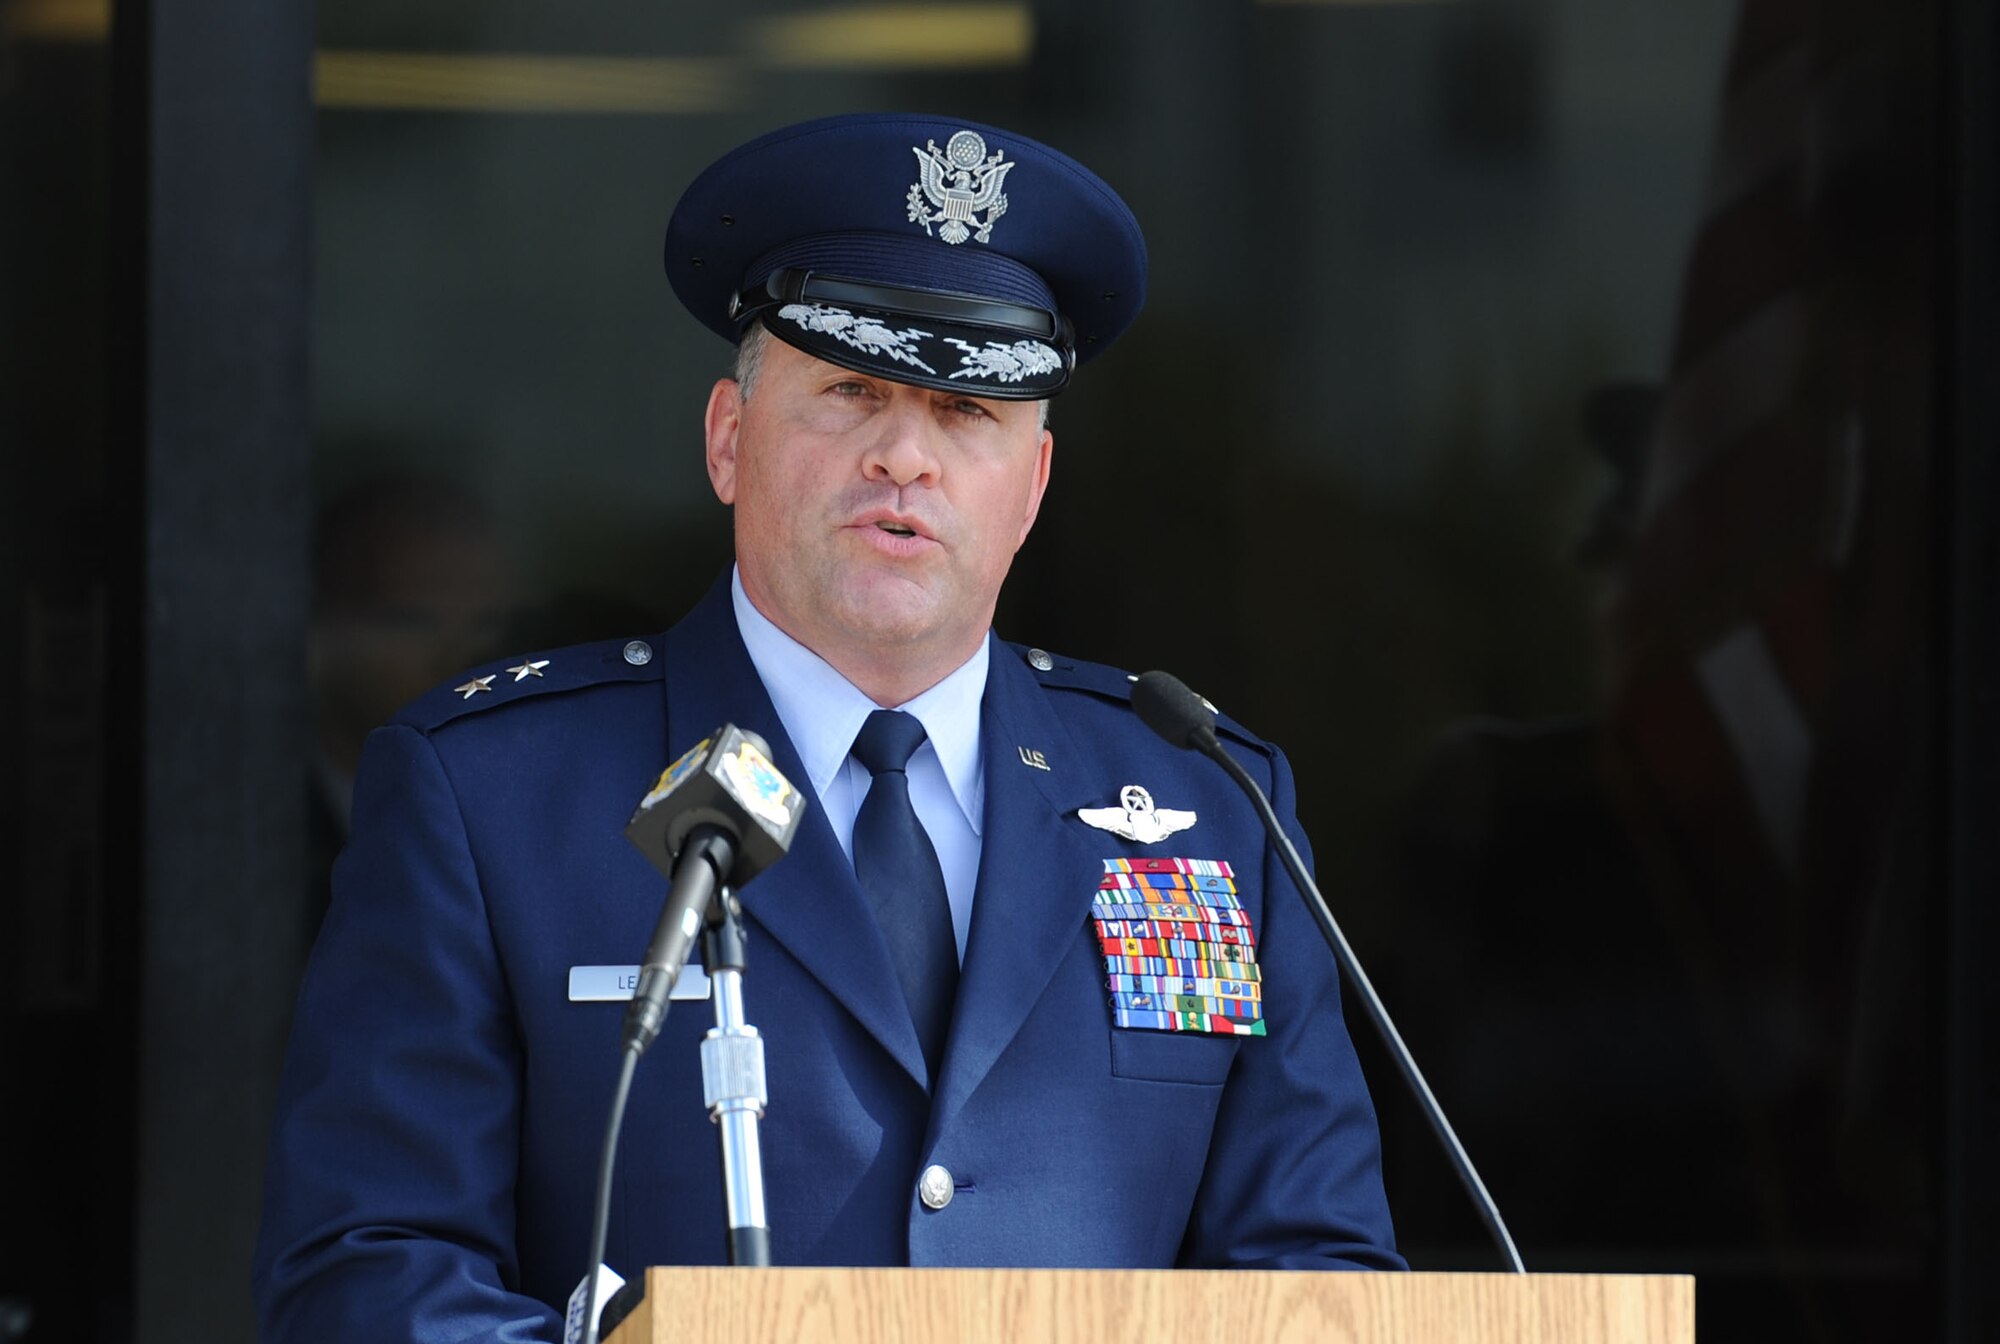 Maj. Gen. Timothy Leahy, 2nd Air Force commander, delivers remarks during the 2nd AF change of command ceremony at the Levitow Training Support Facility Aug. 23, 2017, on Keesler Air Force Base, Miss. (U.S. Air Force photo by Kemberly Groue)